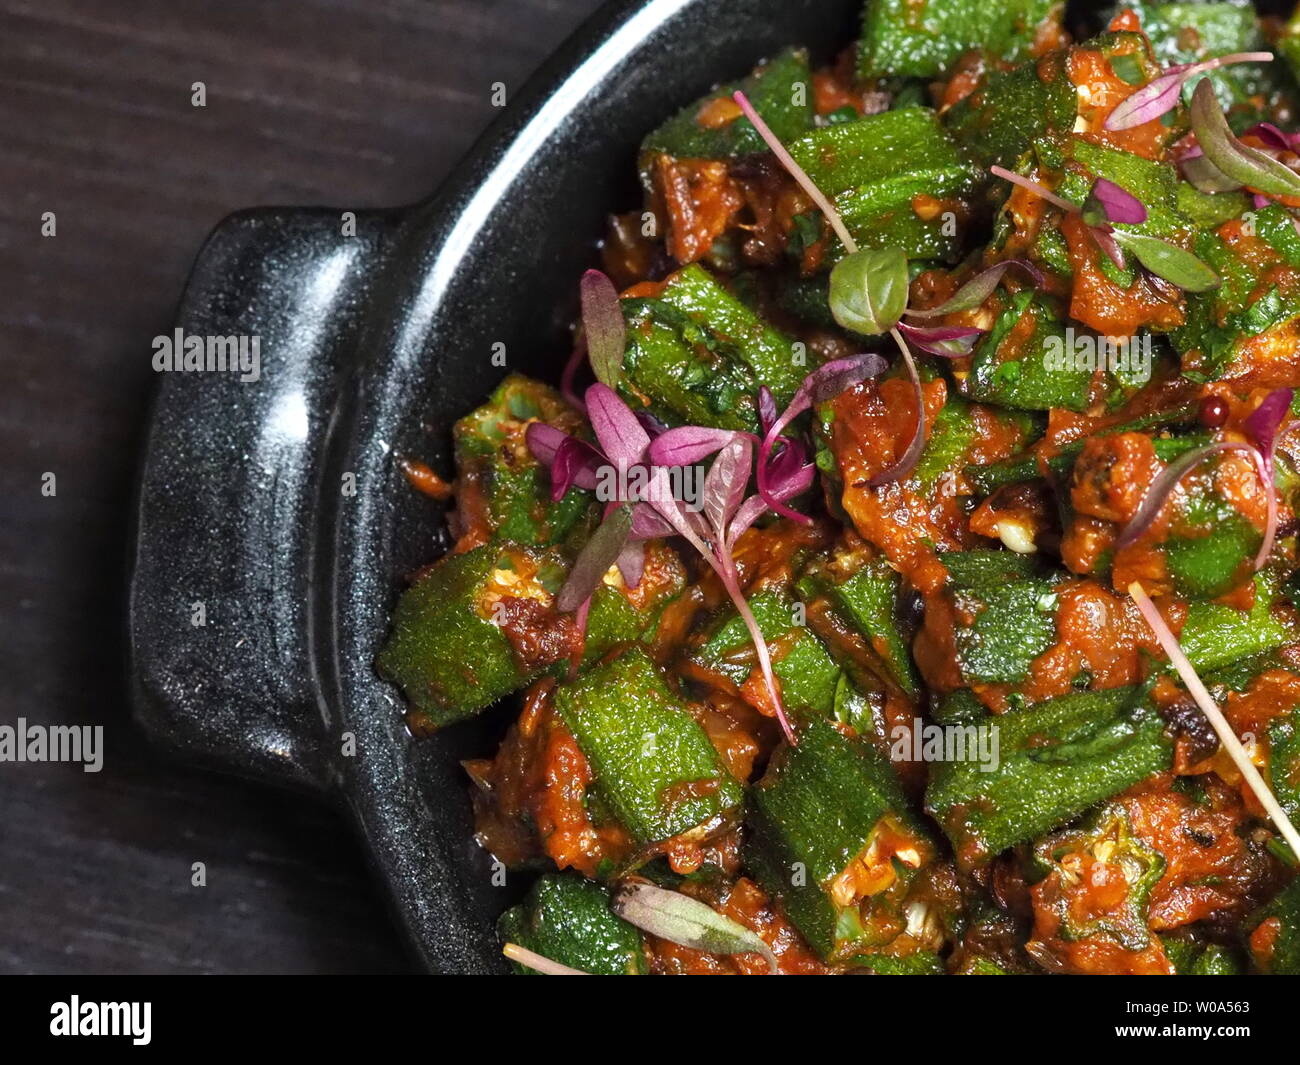 June 2019 - Close Up Of A Plate Of Spicy Baby Okra Curry From A Michelin Starred Restaurant Stock Photo